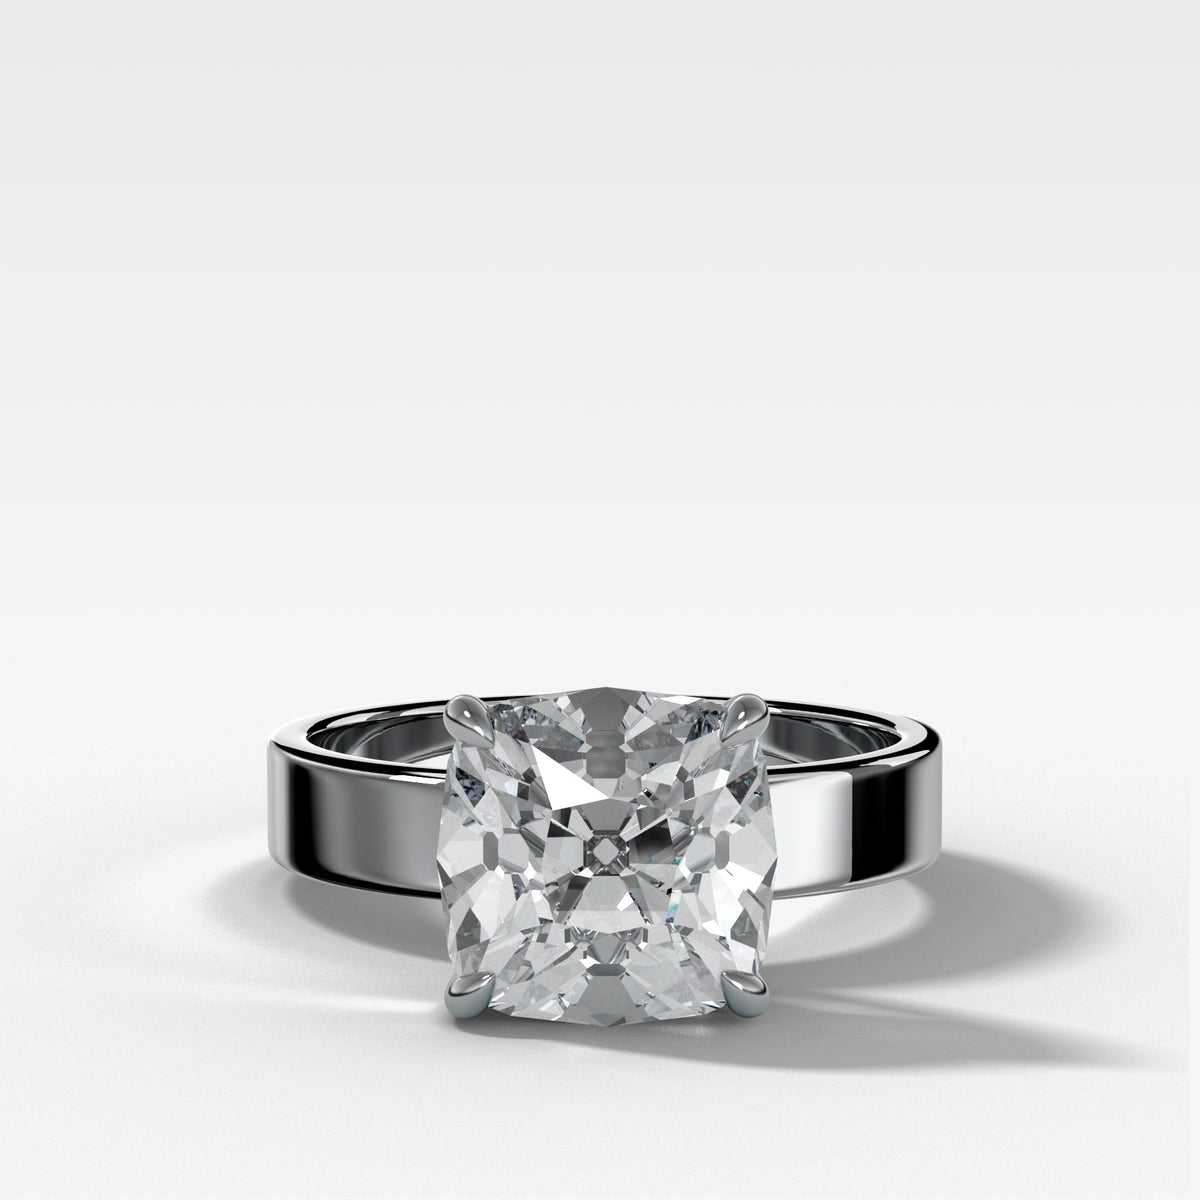 Finest Solitaire Engagement Ring With Old Mine Cut Diamond